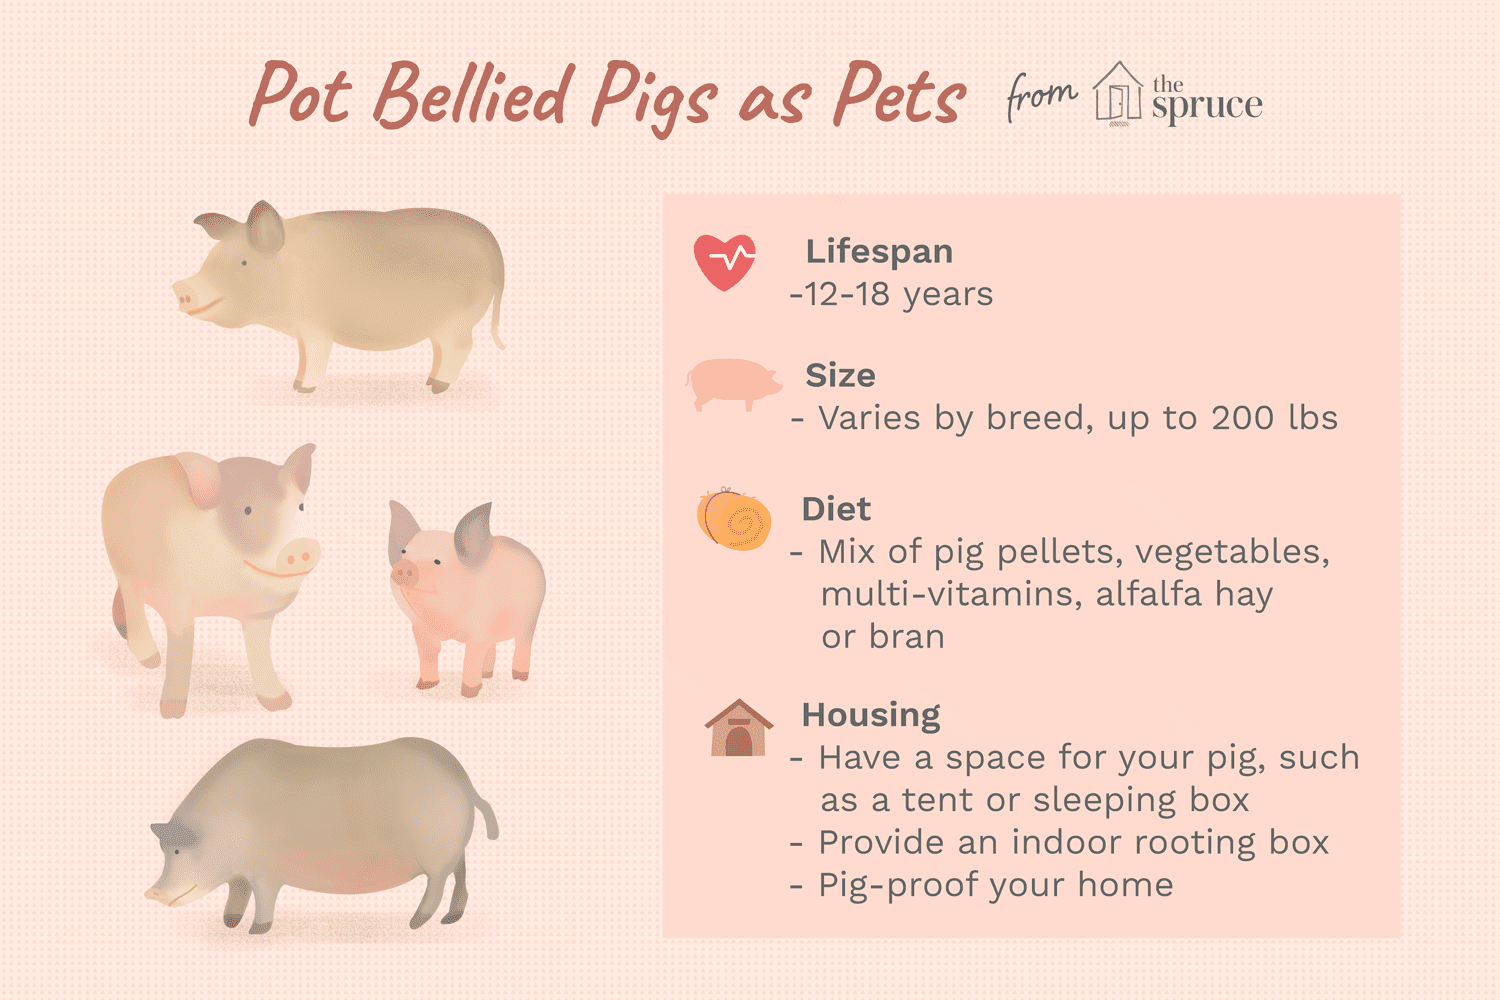 illustration of potbellied pigs as pets